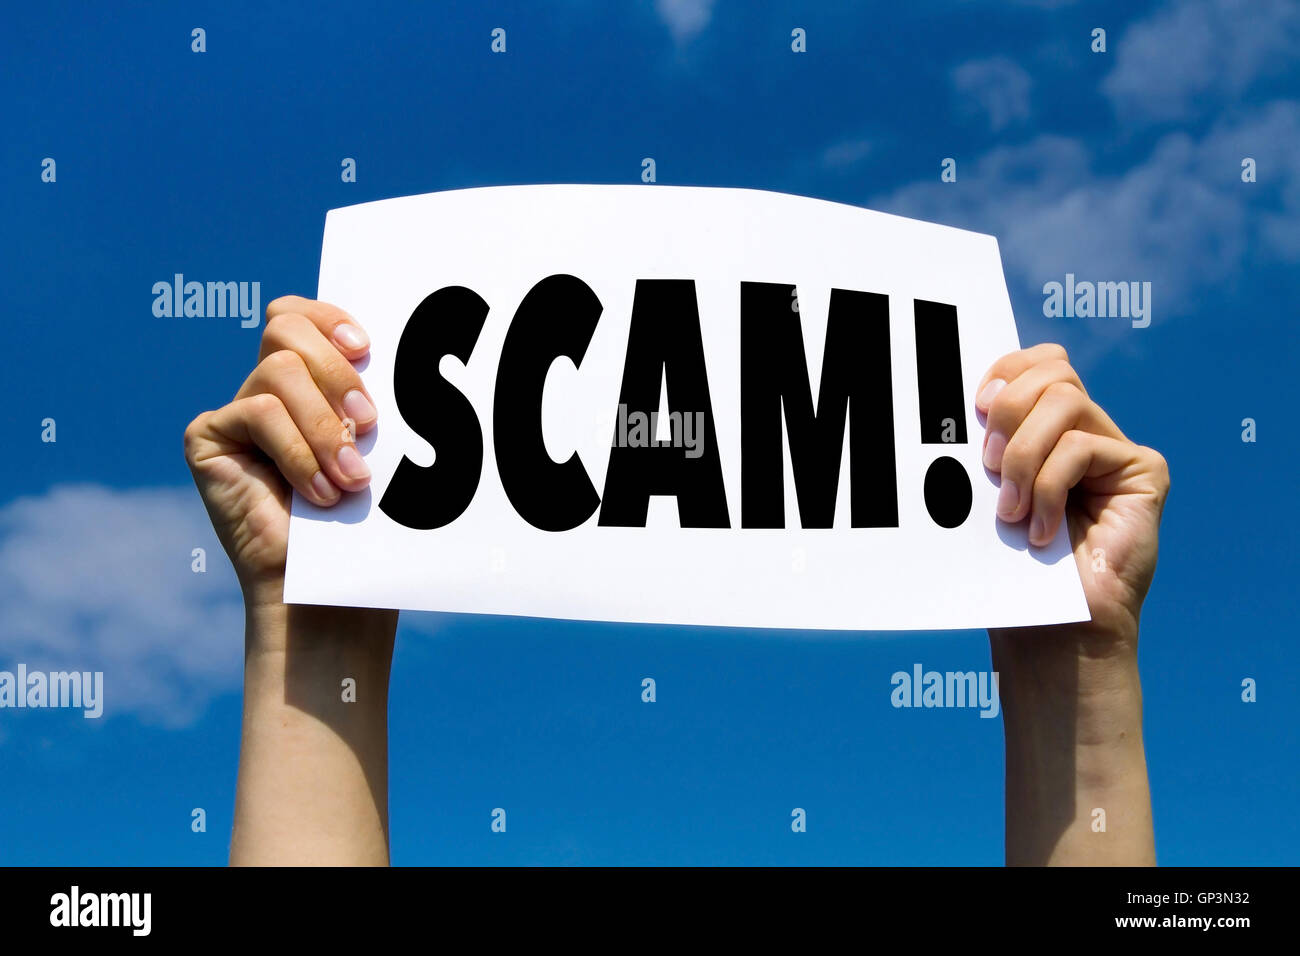 scam concept sign, hands holding white paper with message text alert Stock Photo